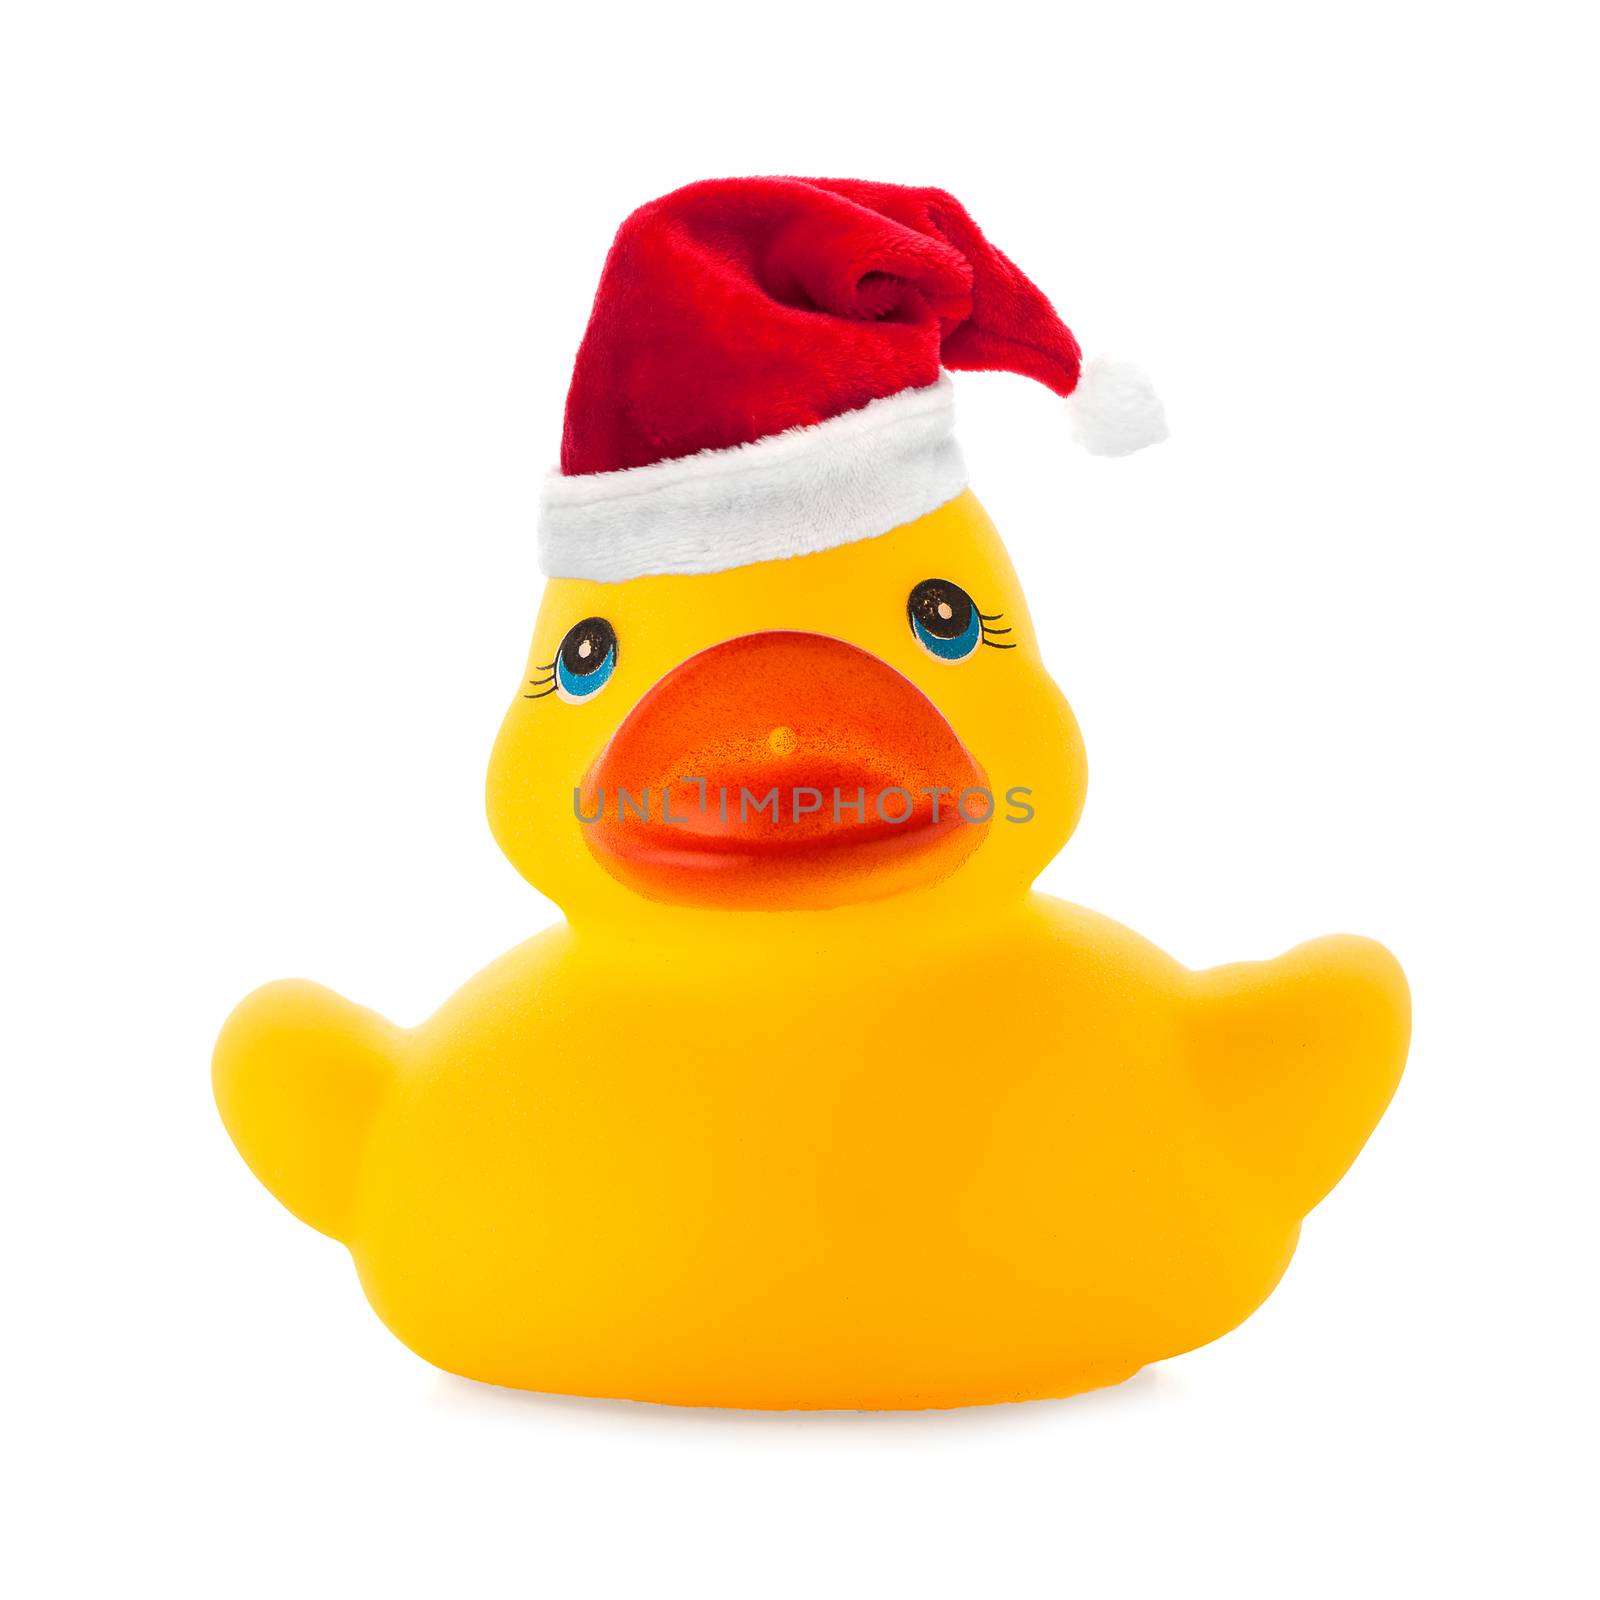 Rubber yellow duck with Santa clause hat by homydesign